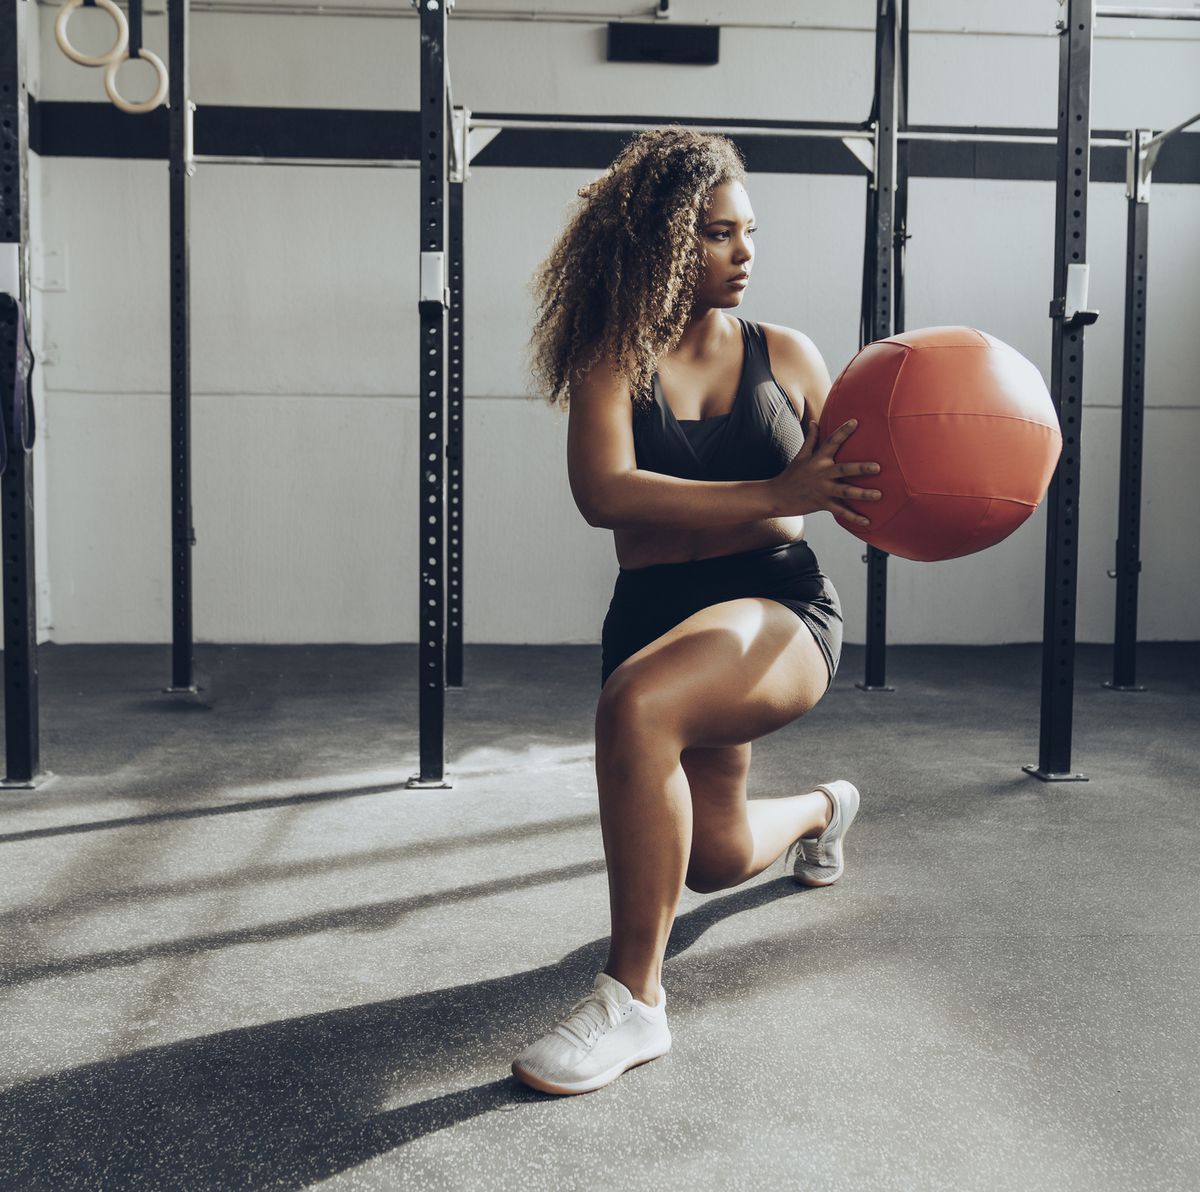 8 fitness tips from experts that will help you maximise the